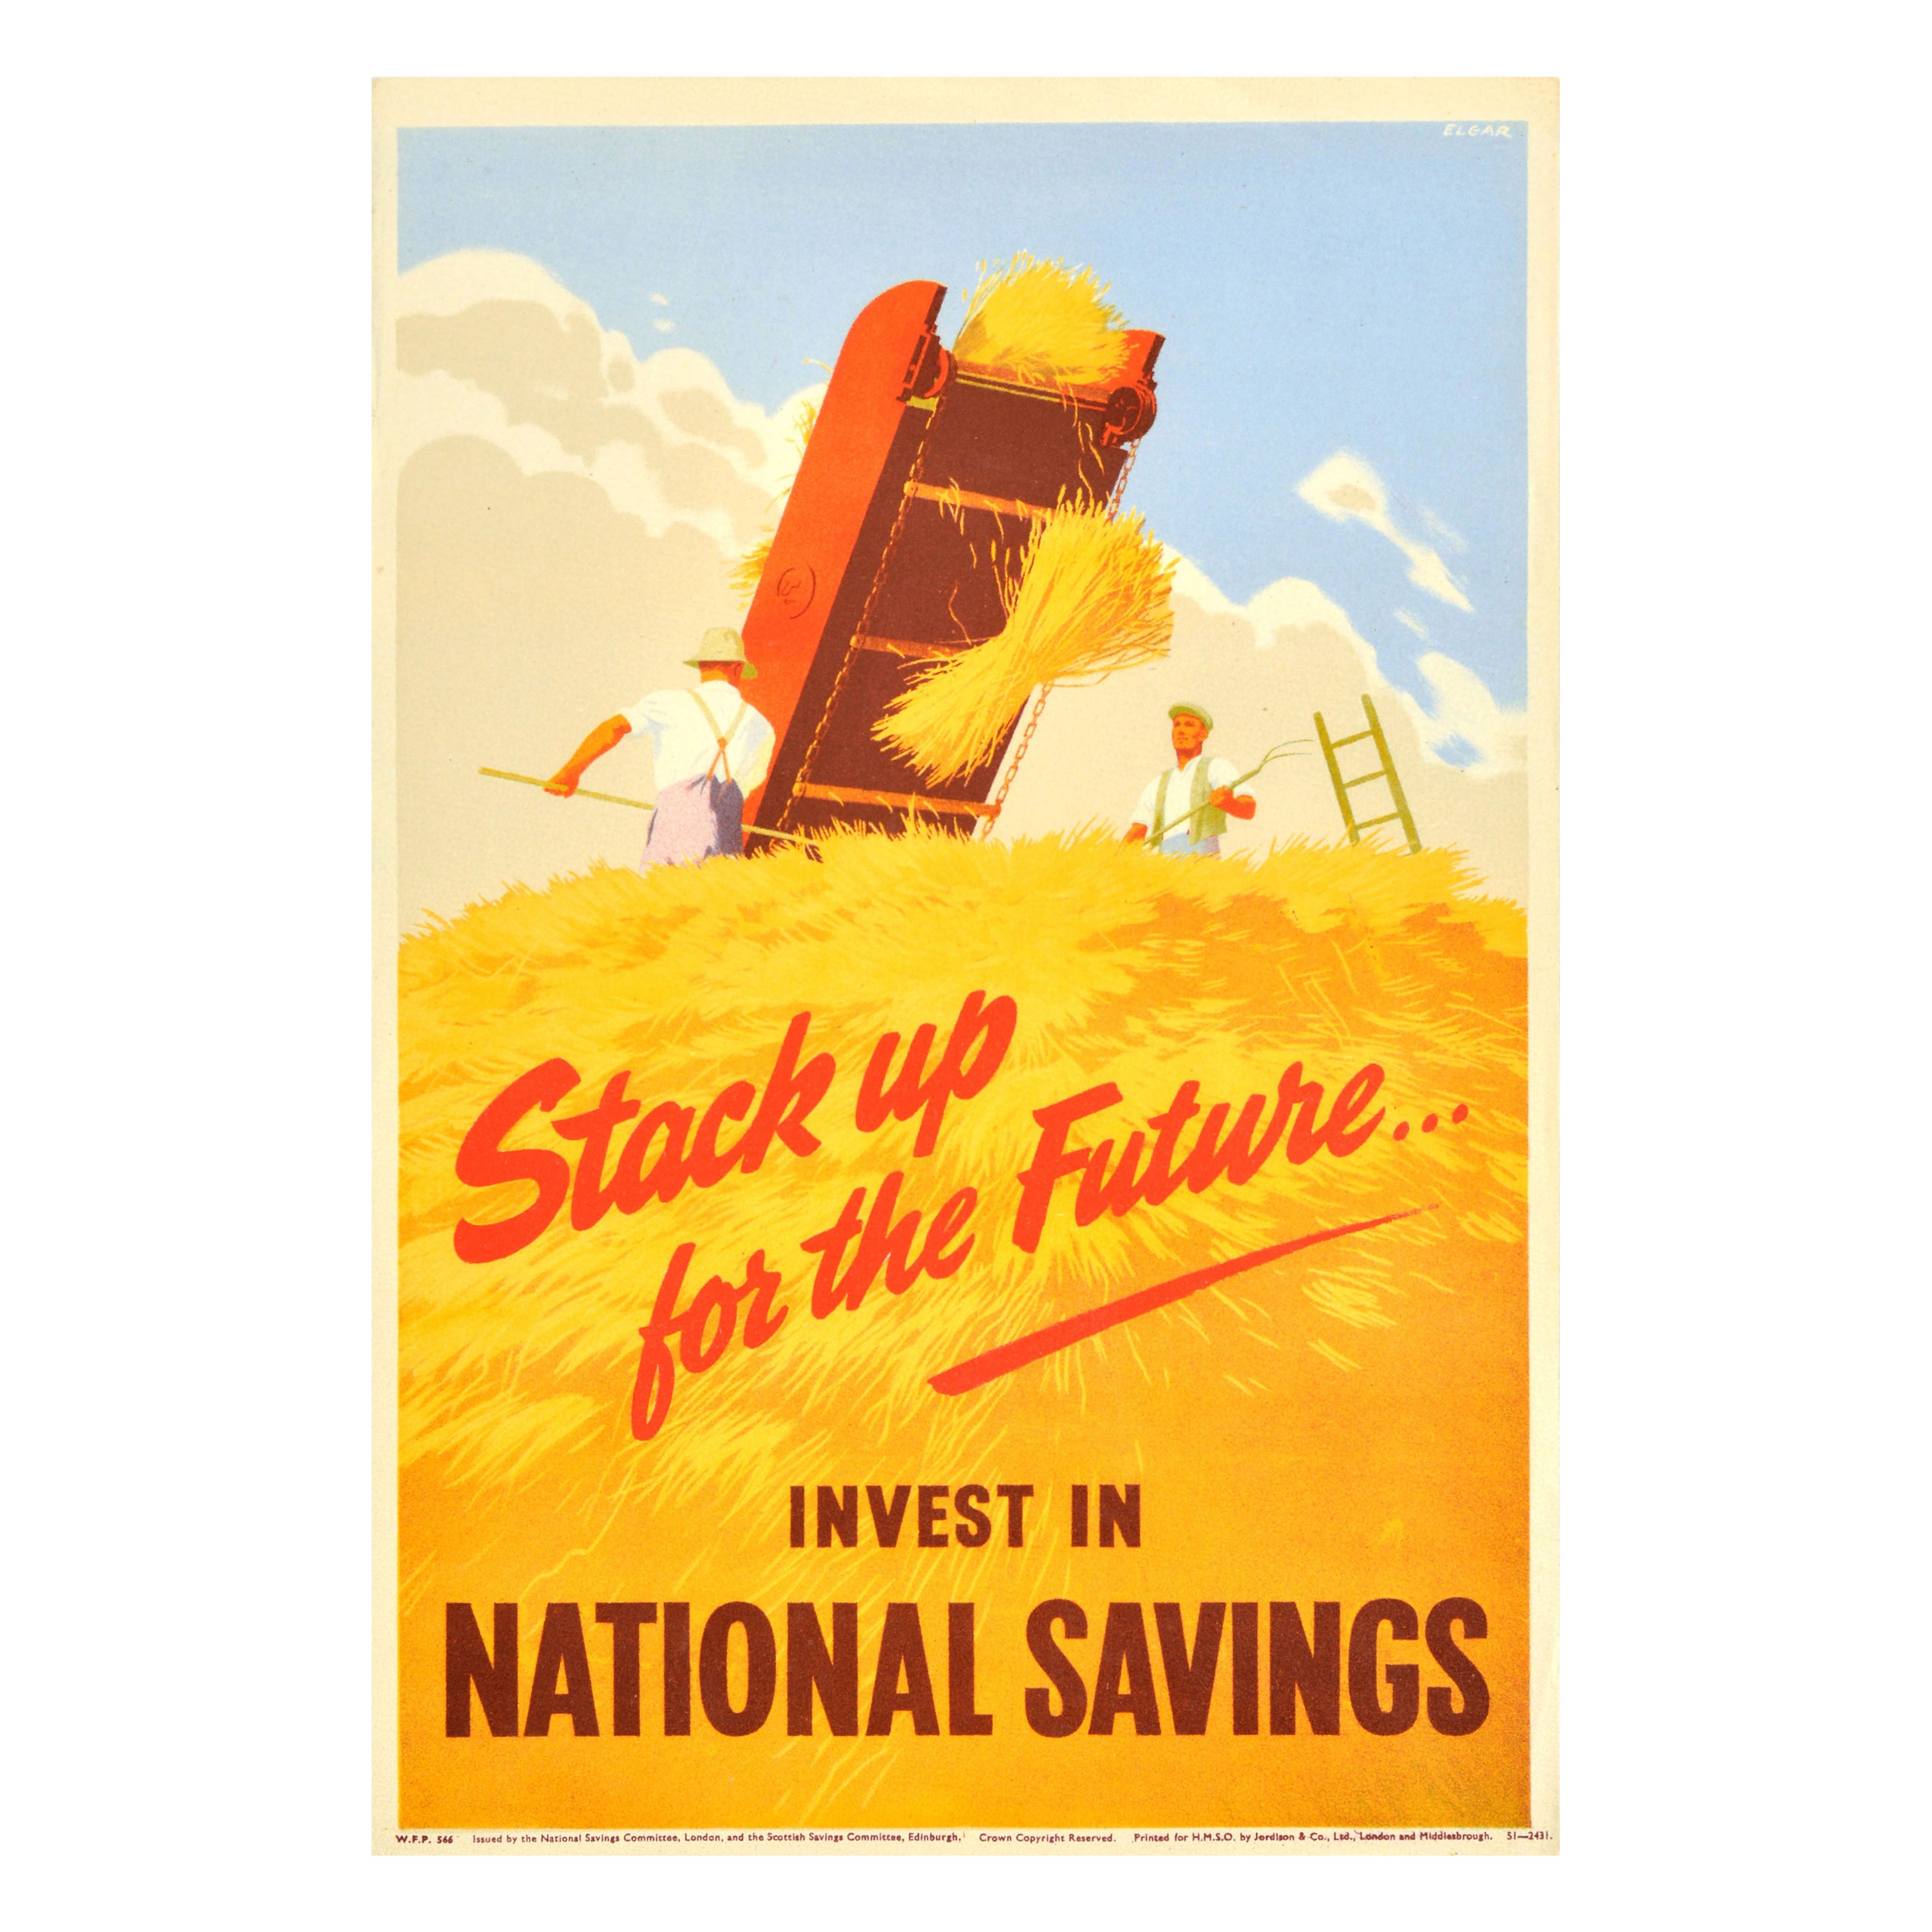 Original Vintage Advertising Poster Stack Up For The Future National Savings